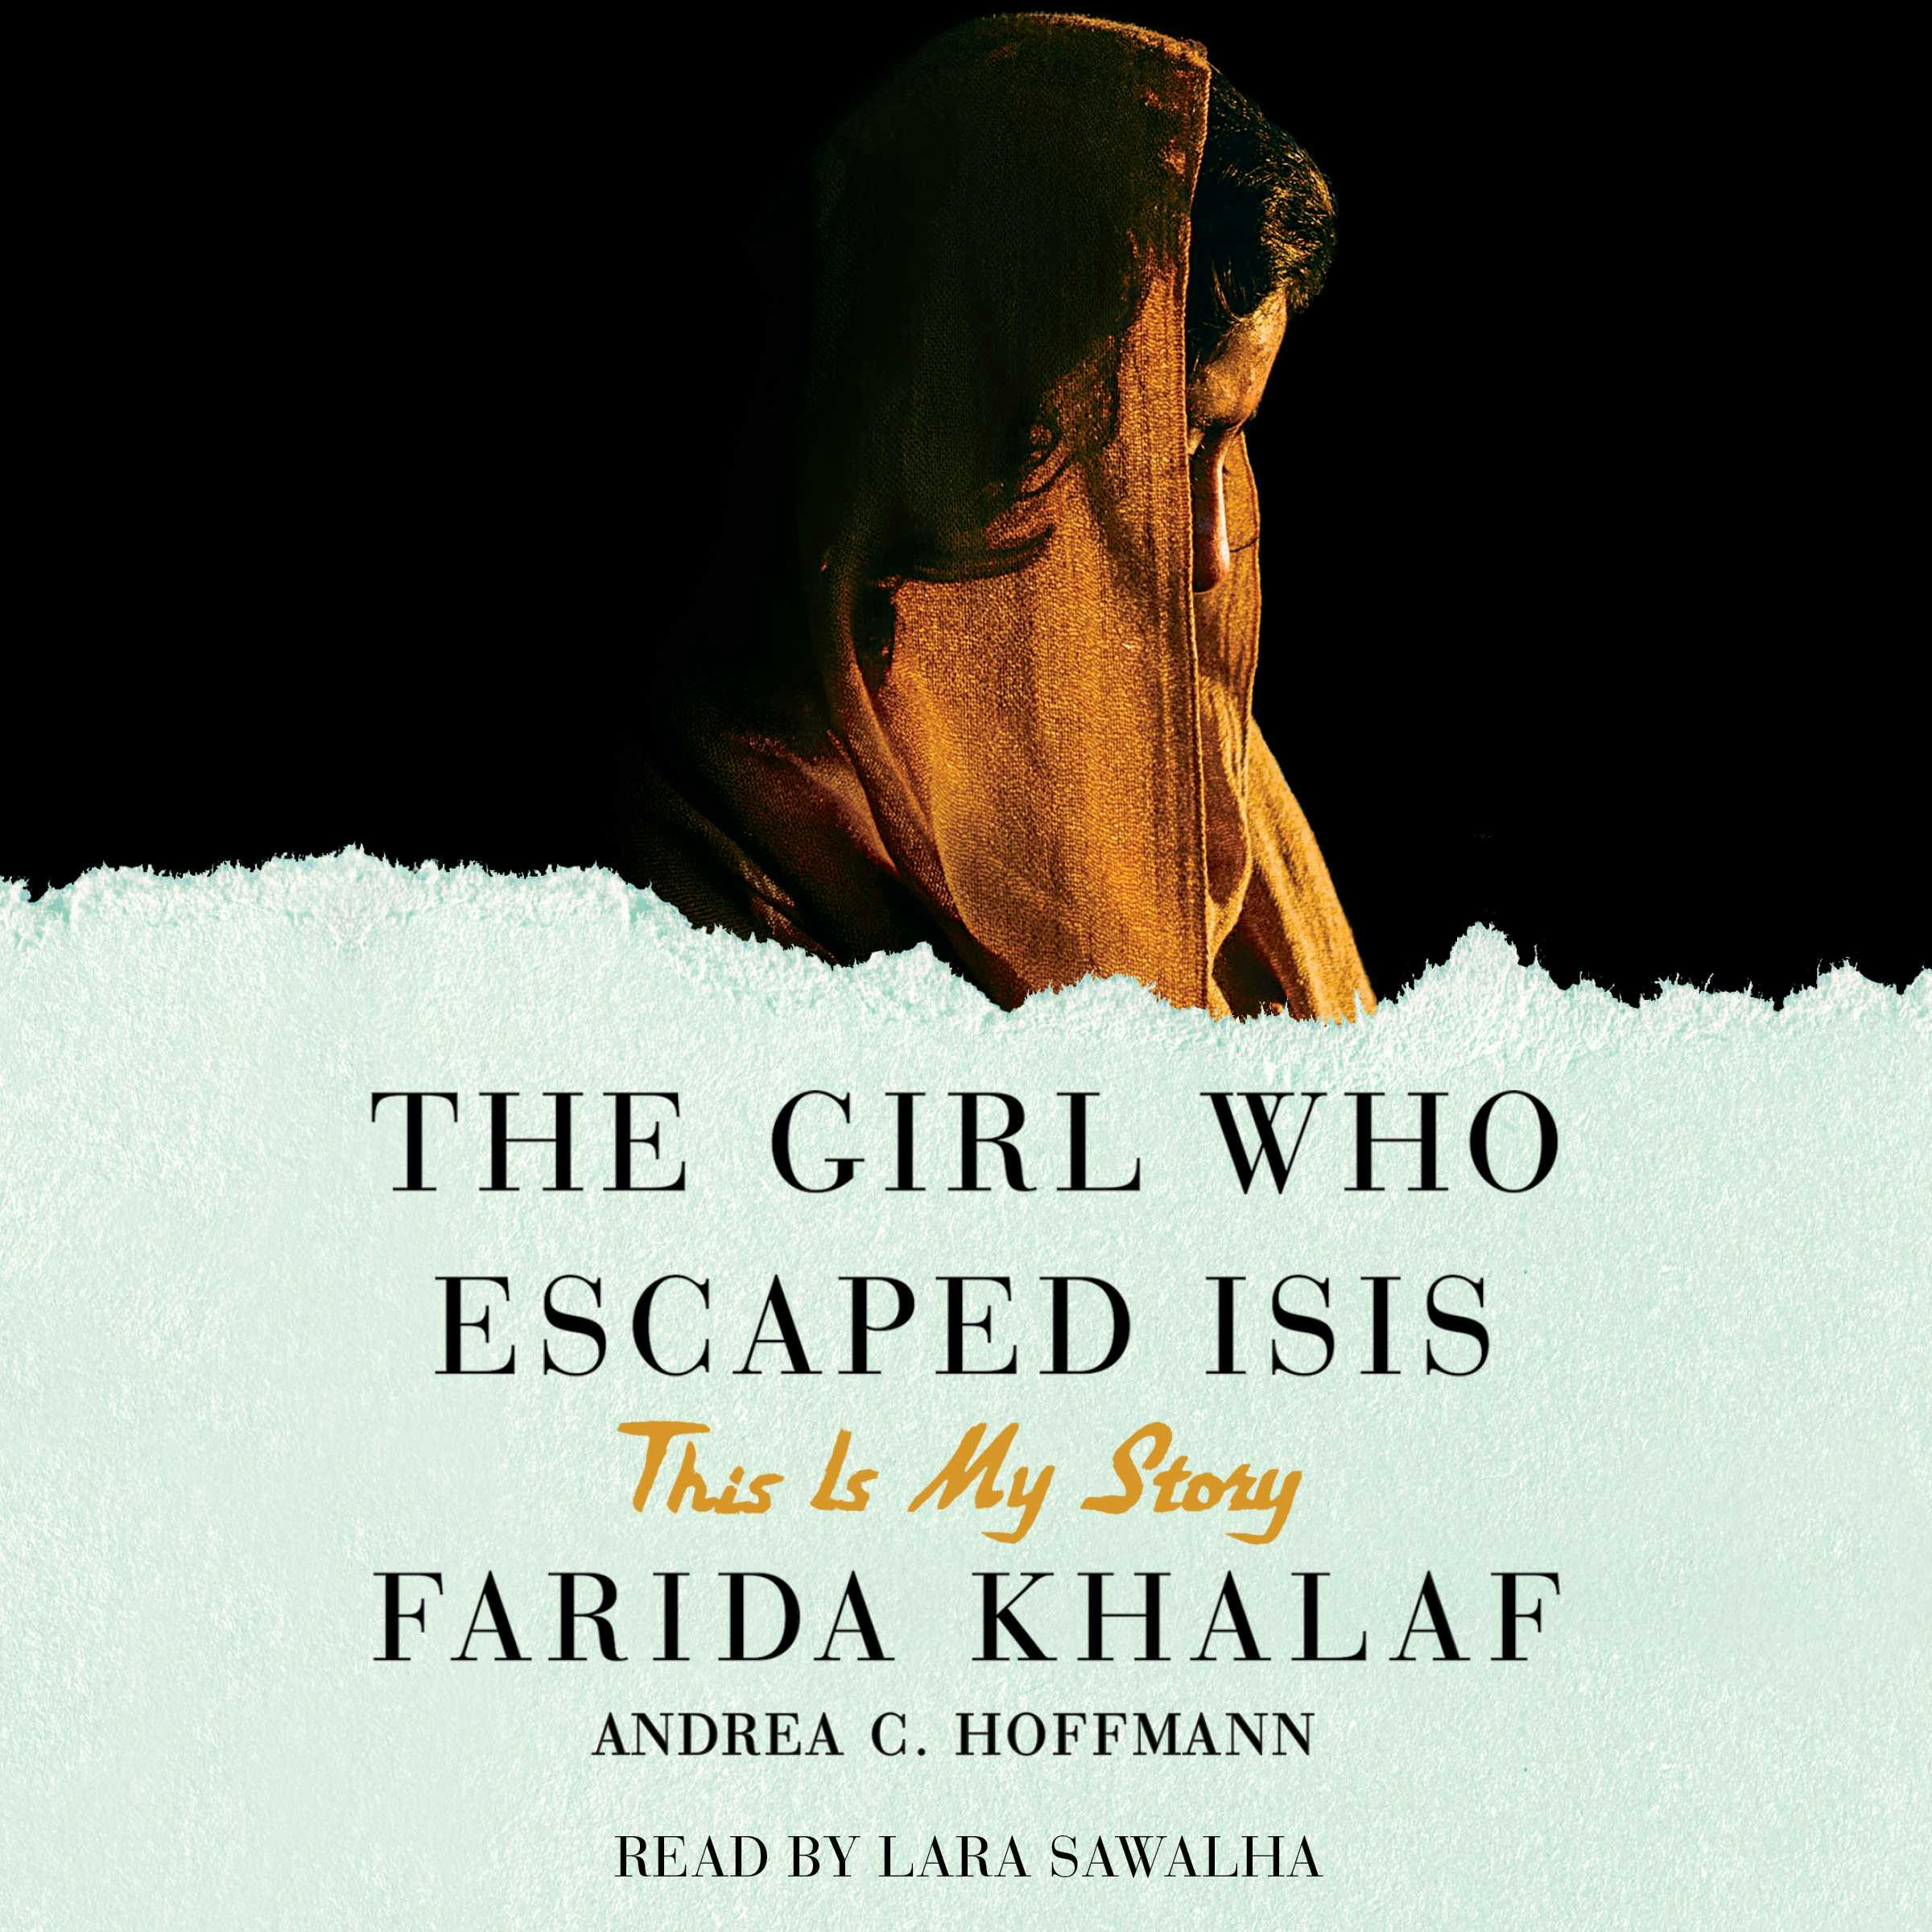 The Girl Who Escaped ISIS: This Is My Story - Andrea C. Hoffmann, Farida Khalaf